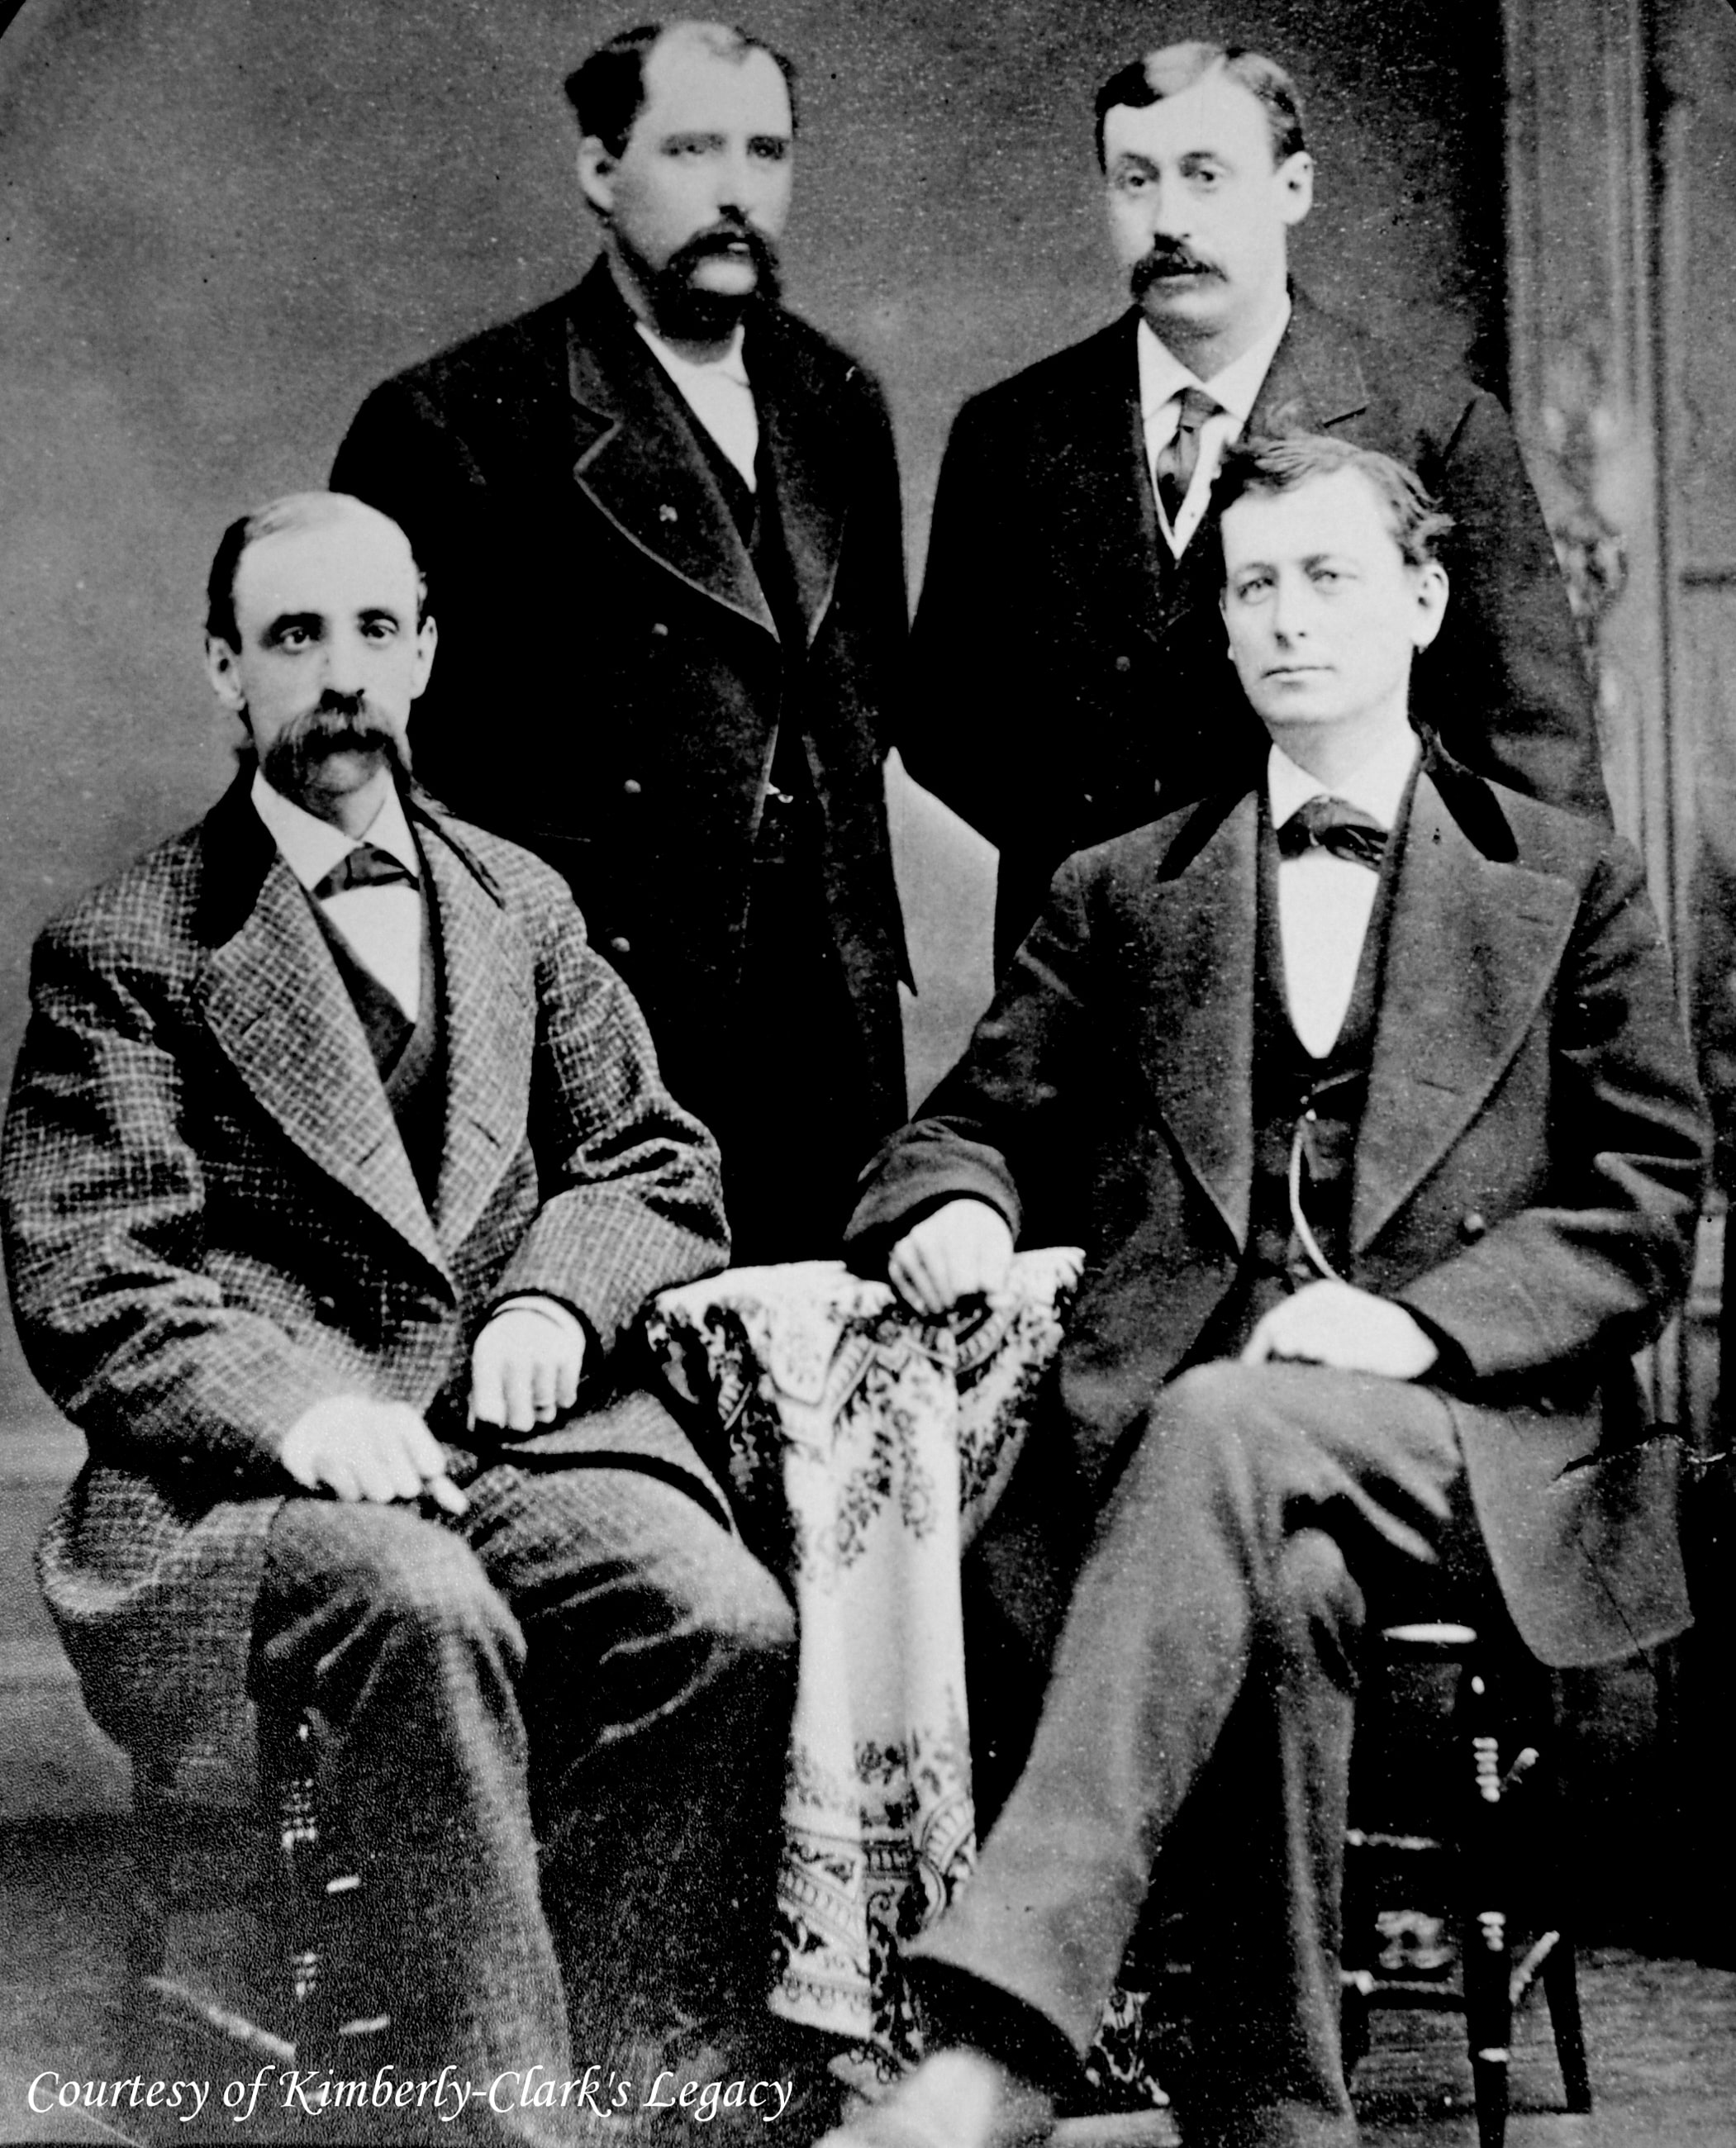 In 1872, John A. Kimberly (far left), Charles Clark (standing left), Havilah Babcock (standing right) and Frank Shattuck (far right), formed a paper company in Neenah, Wisconsin, which they named Kimberly, Clark & Co., initially specializing in top-quality newsprint. Today, Kimberly-Clark and its well-known global brands, including Andrex, Cottonelle, Depend, Huggies, Kleenex, Plenitude, Poise, Scott and Kotex, are an indispensable part of life for people in more than 175 countries.